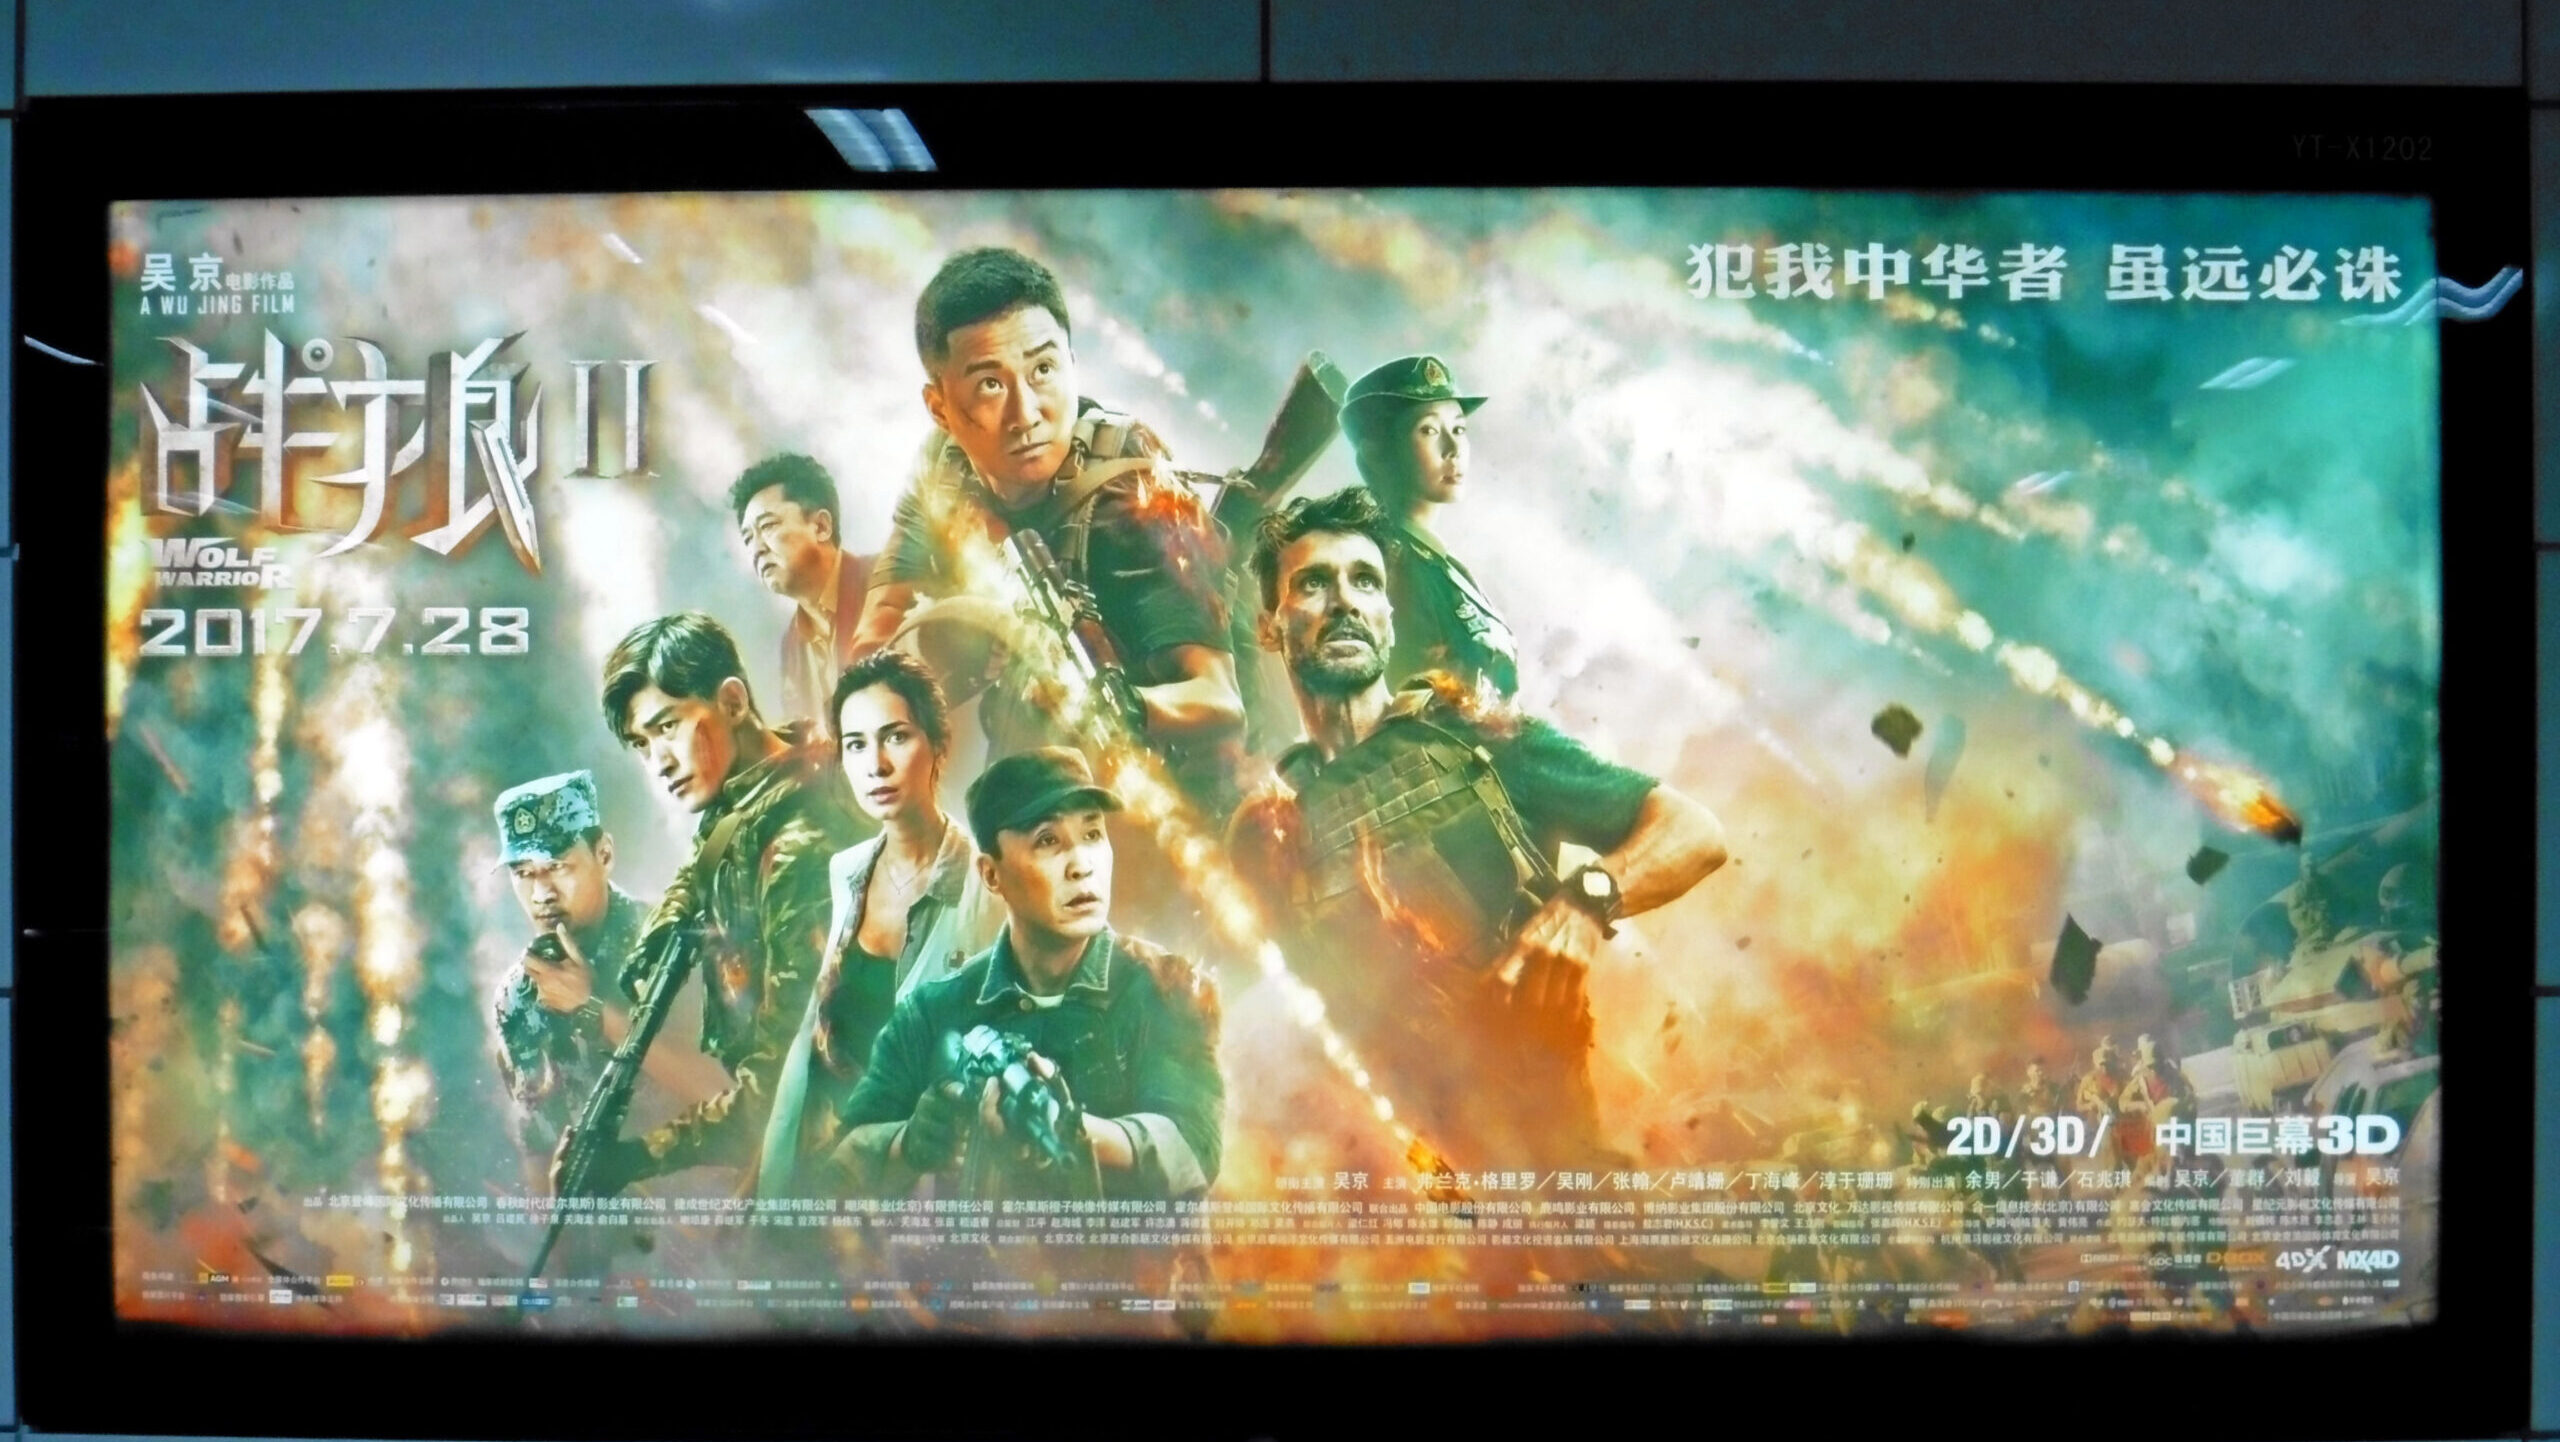 China’s Quest for Blockbuster Soft Power